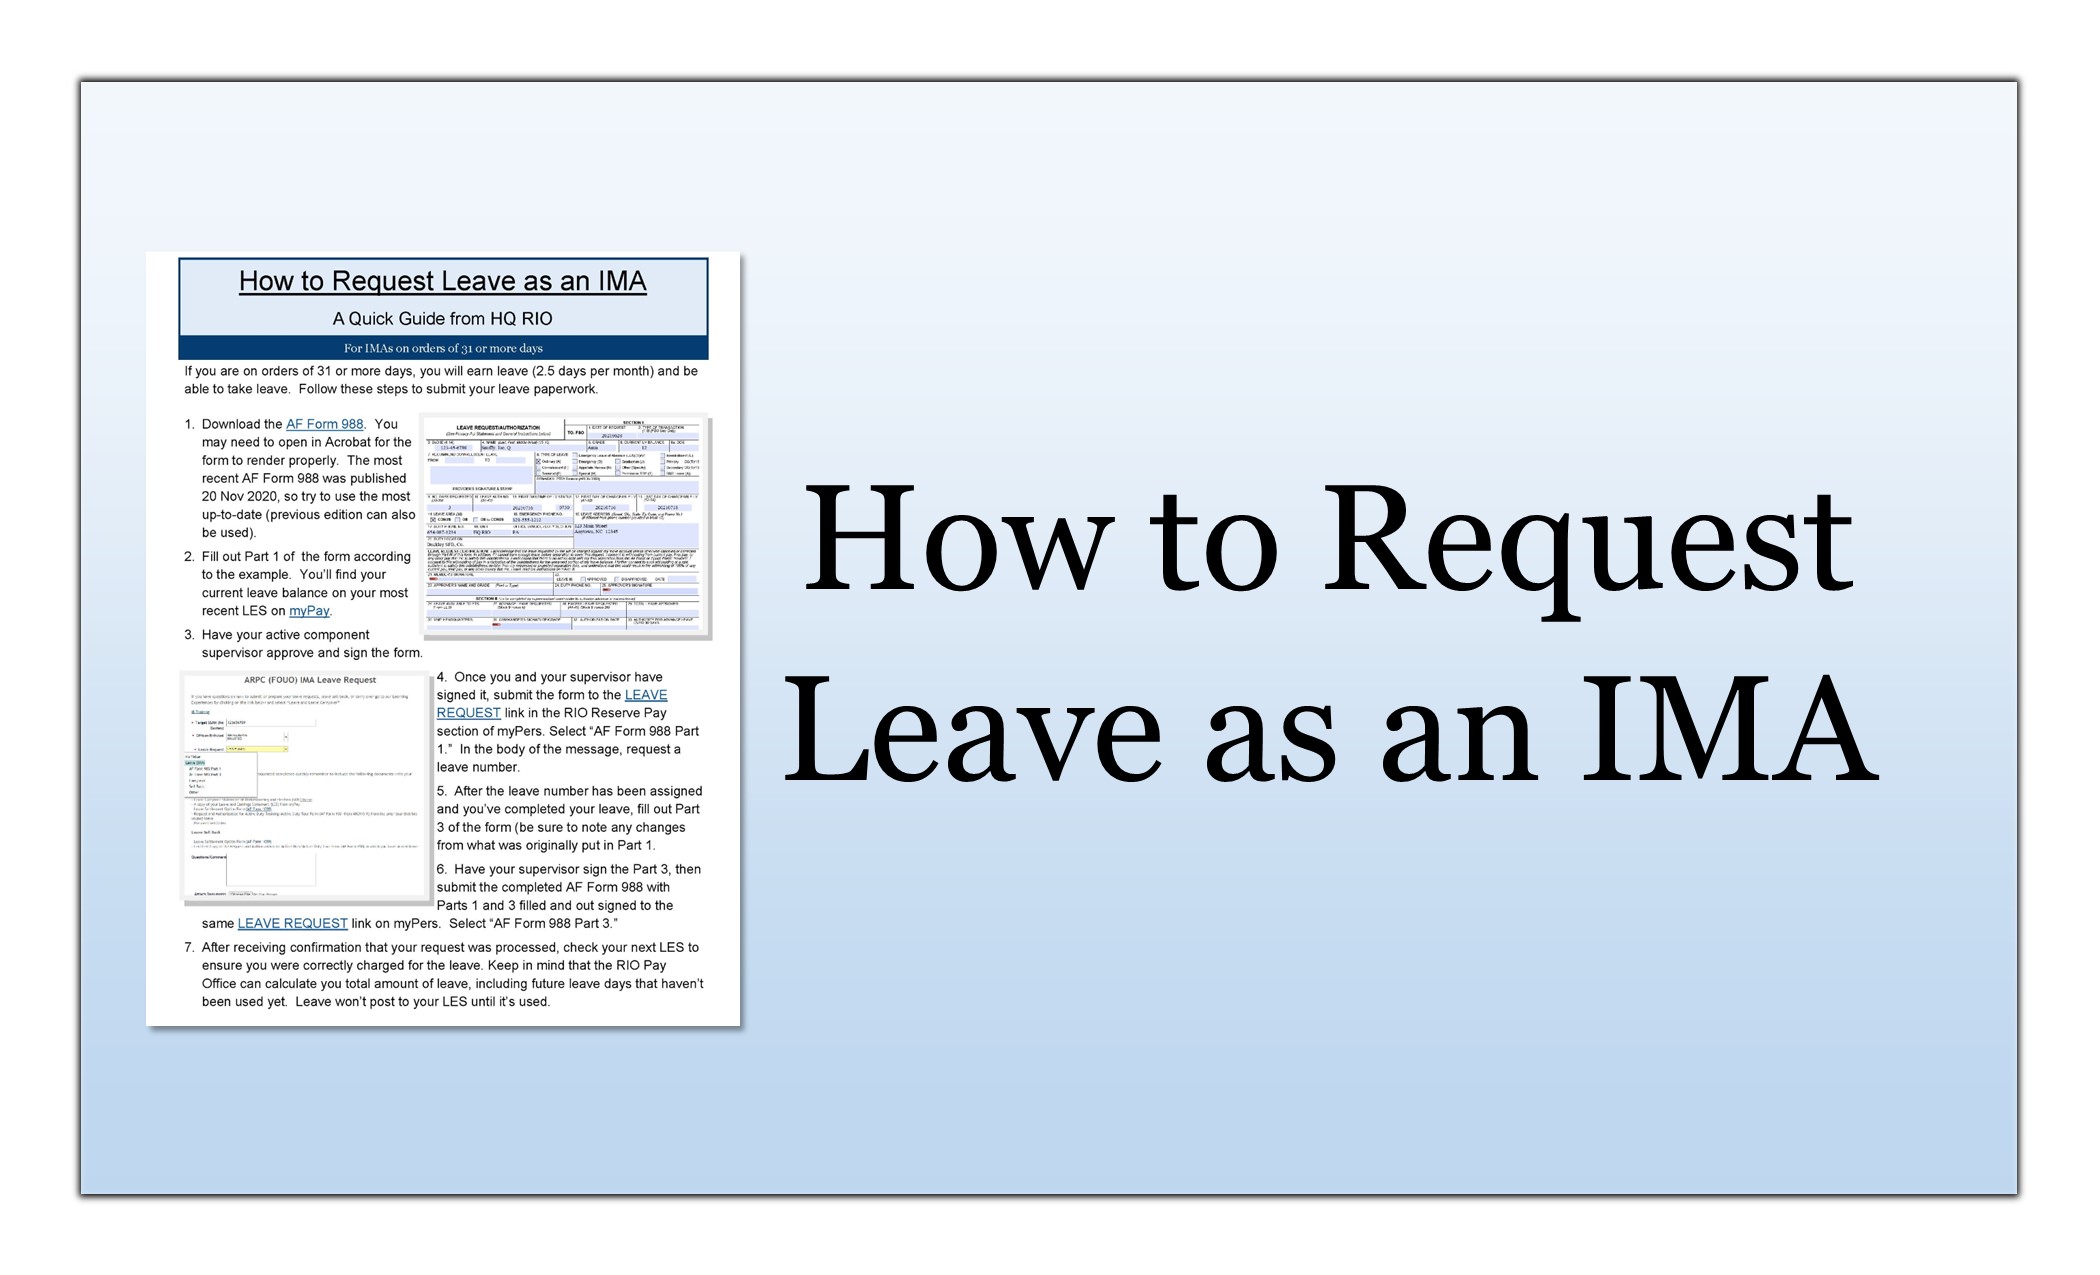 How to Request Leave Quick Guide thumbnail link